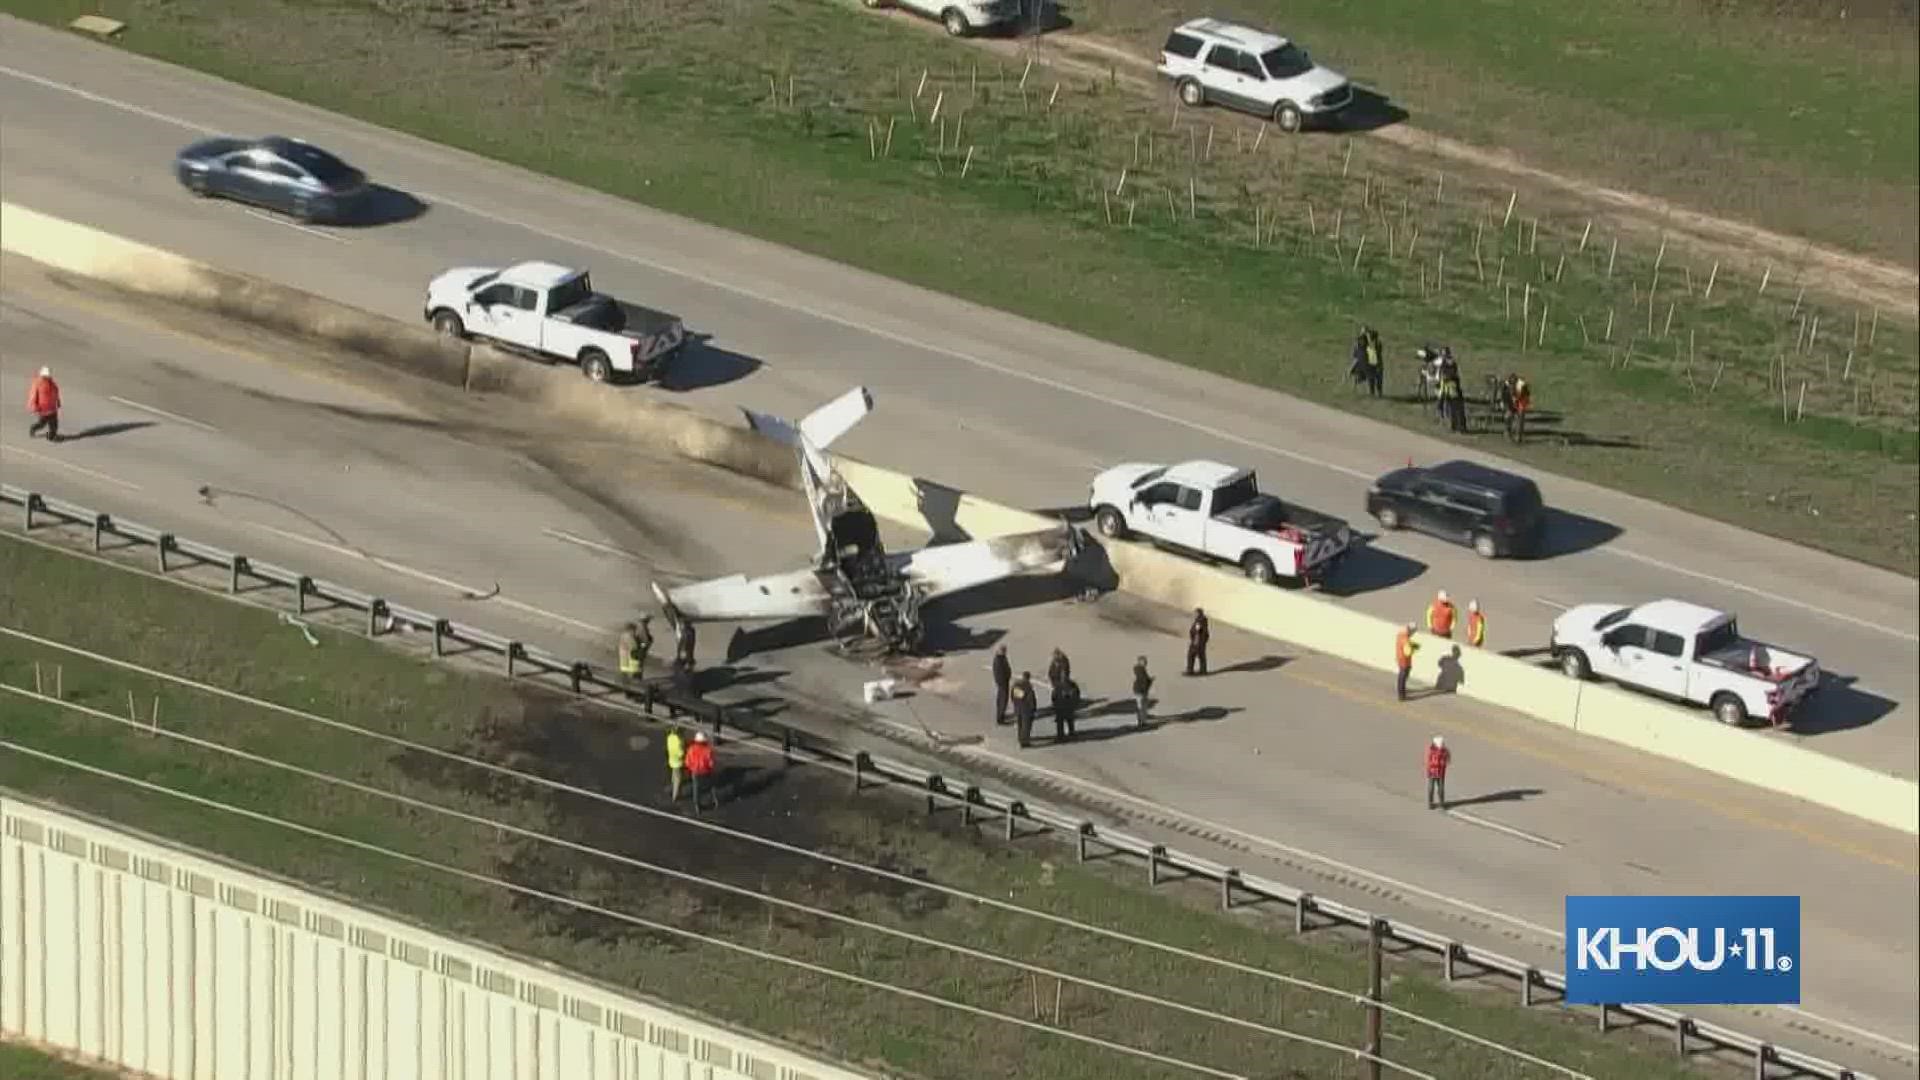 Authorities with the Texas Department of Public Safety gave an update after a plane crashed on the Grand Parkway on Sunday, Jan. 22, 2023.